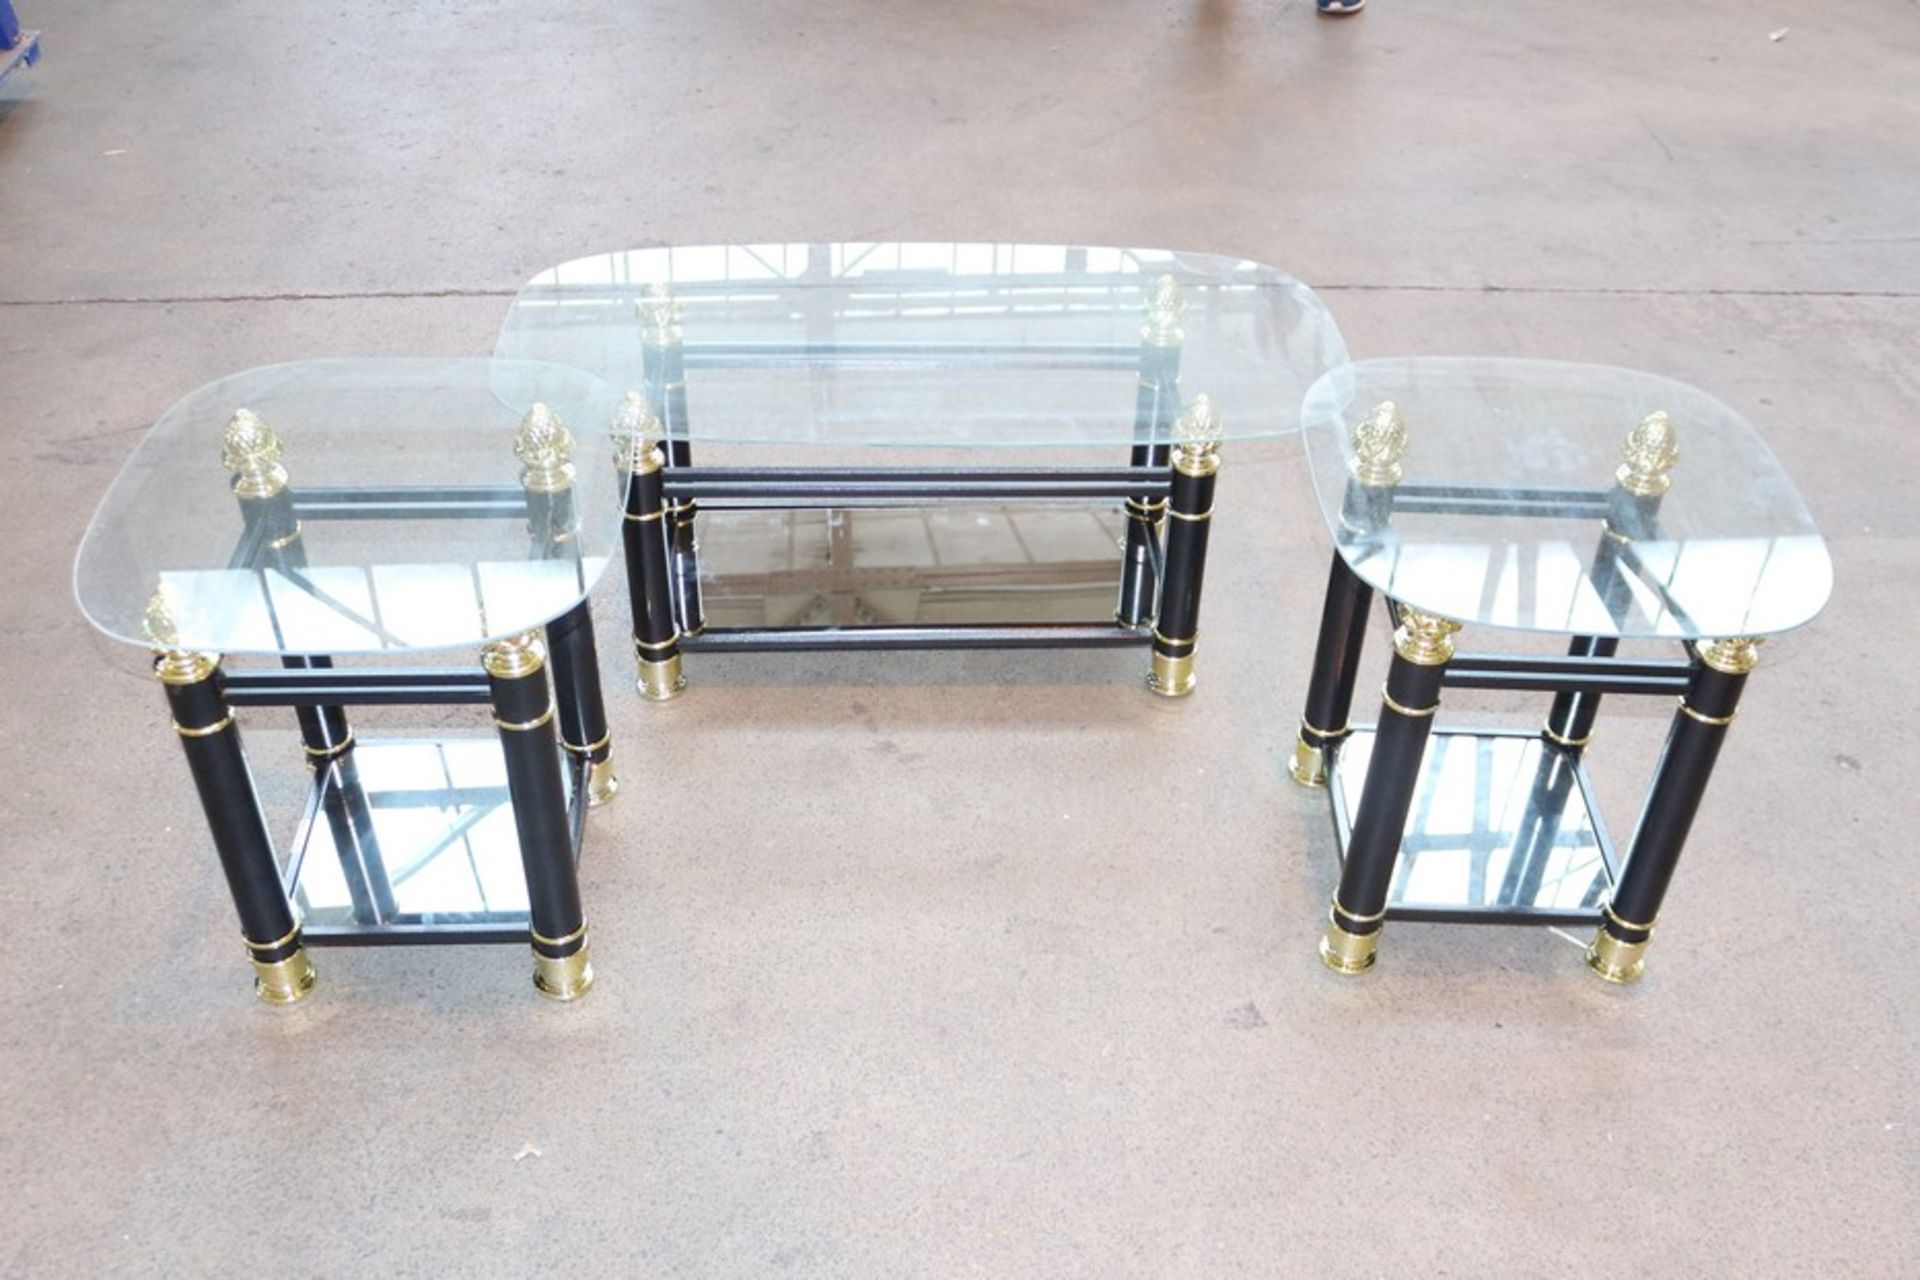 1x BOXED BRAND NEW MODERN DESIGNED NEST OF 3X TABLES IN BLACK/GOLD & GLASS RRP £129 (TW-IF)